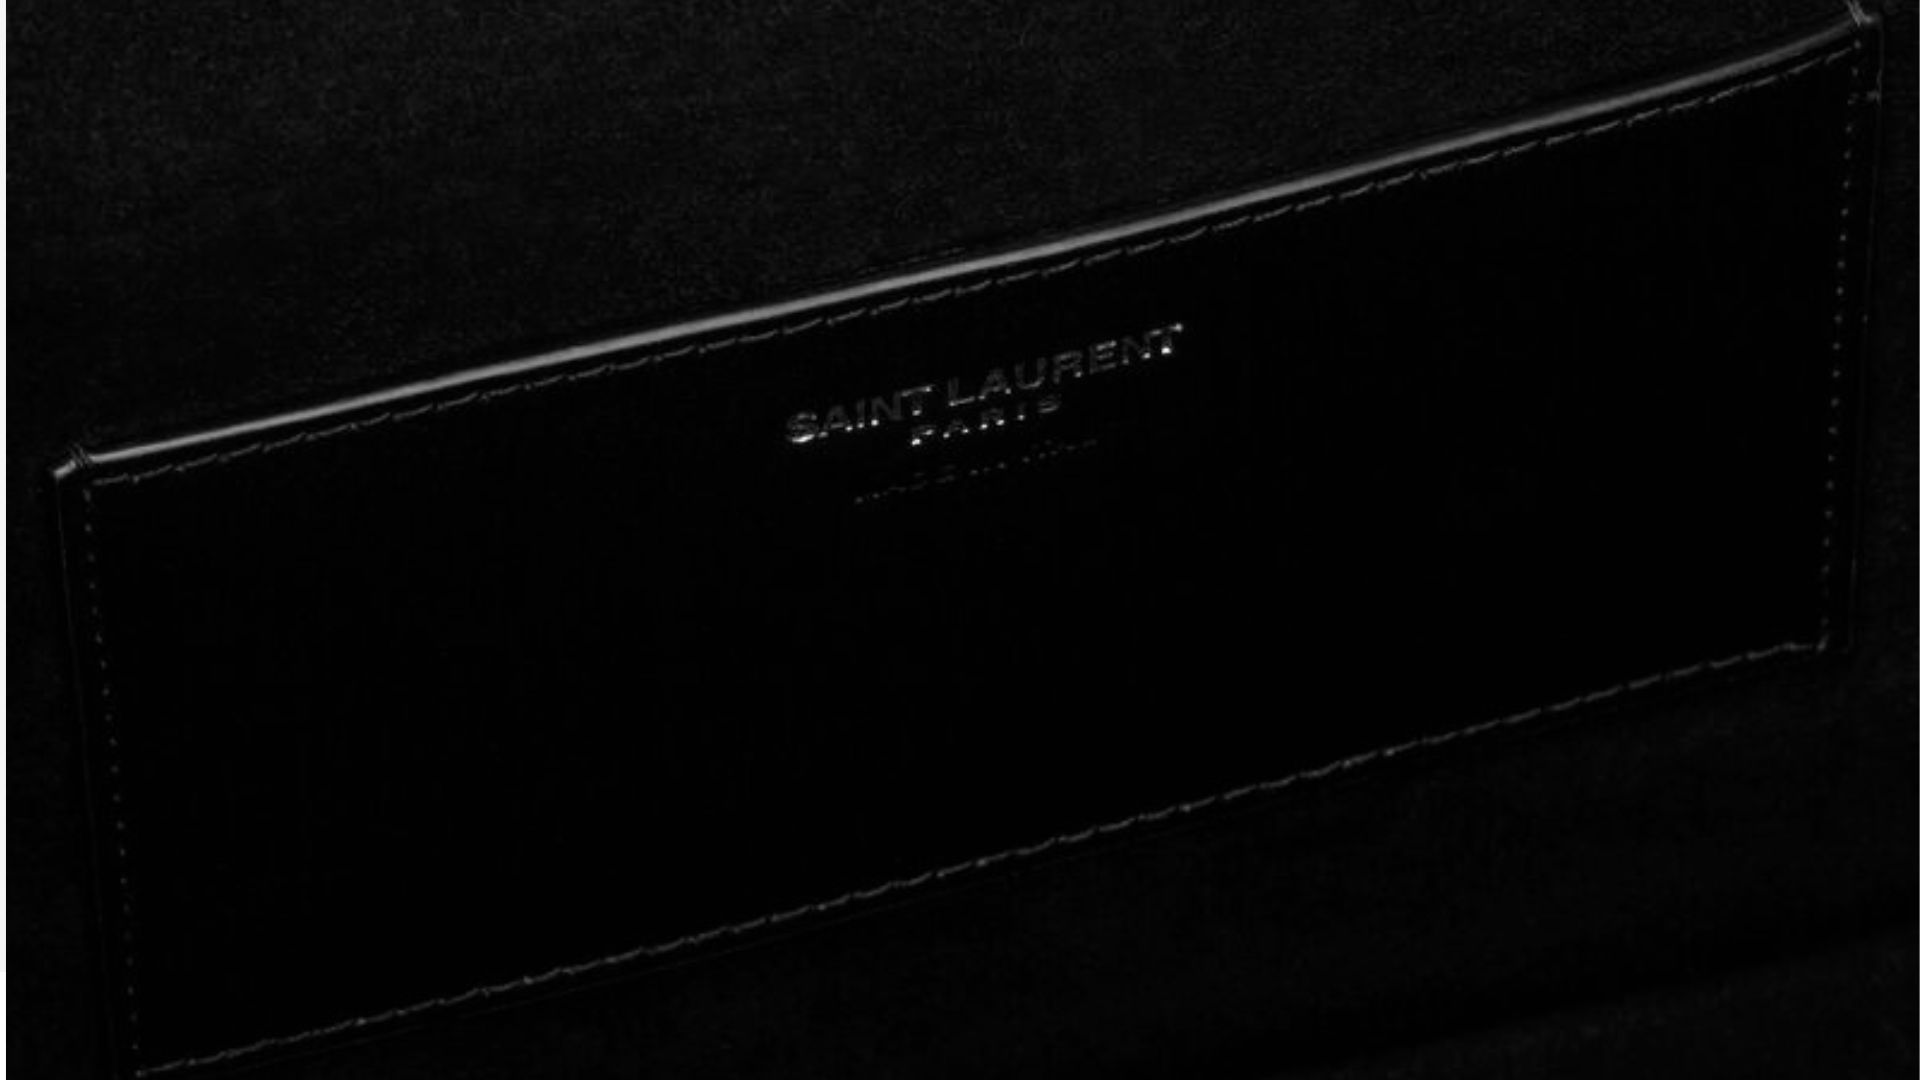 YSL's Rs 1.5 Lakh Lunch Box Will Give Mom's Obsessed With